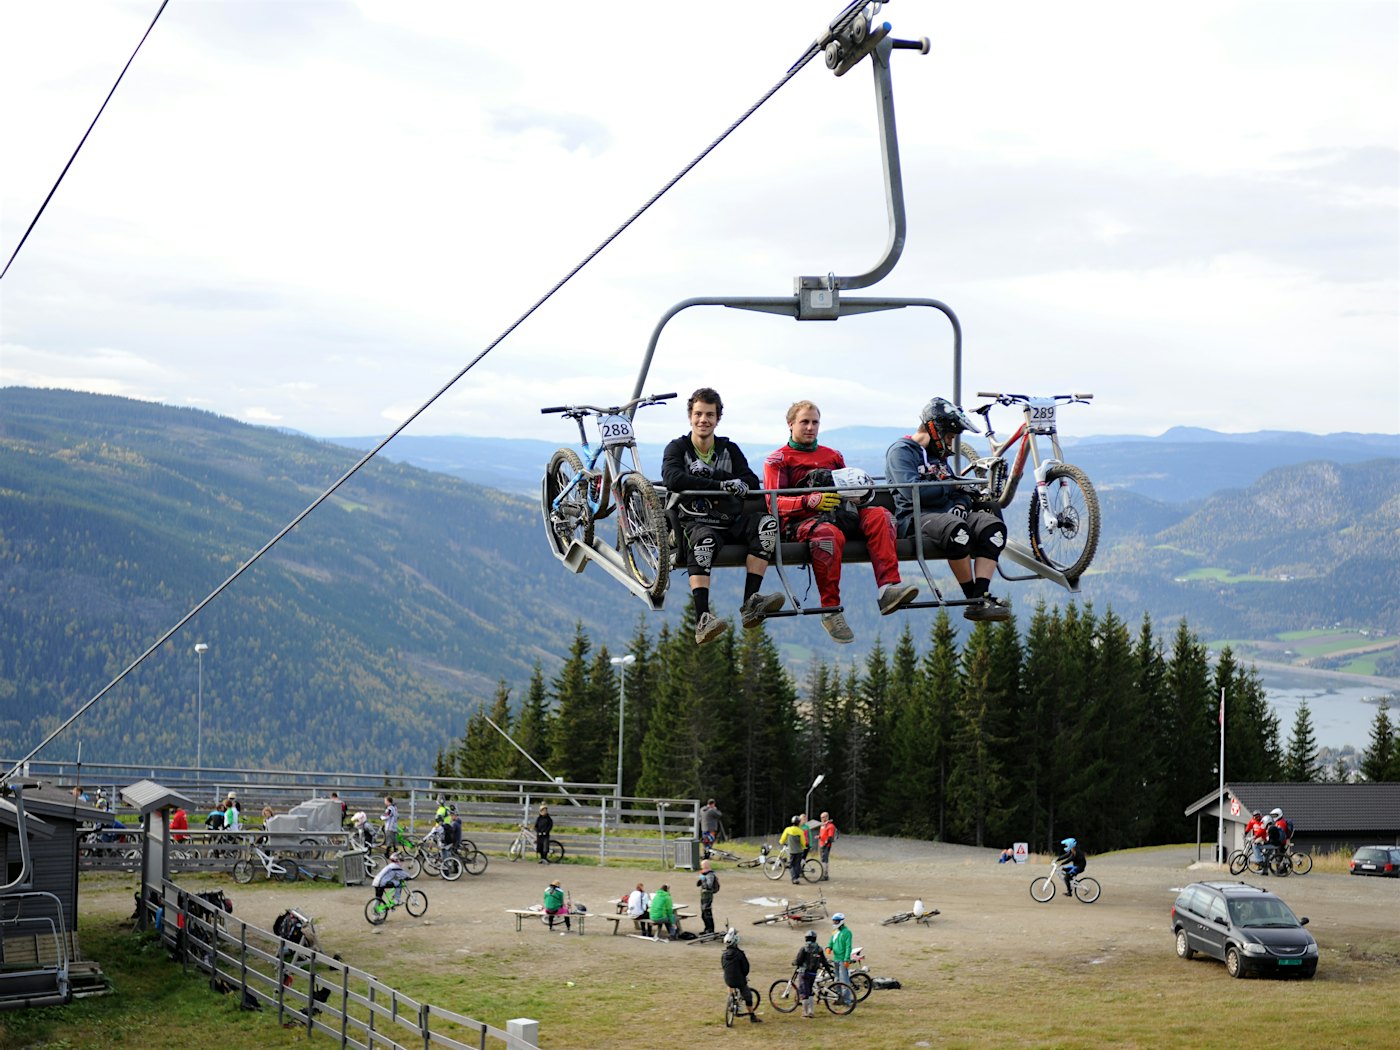 Three cyclists sit in a chairlift with their bikes, several cyclists on the ground below, mountains in the background. Photo